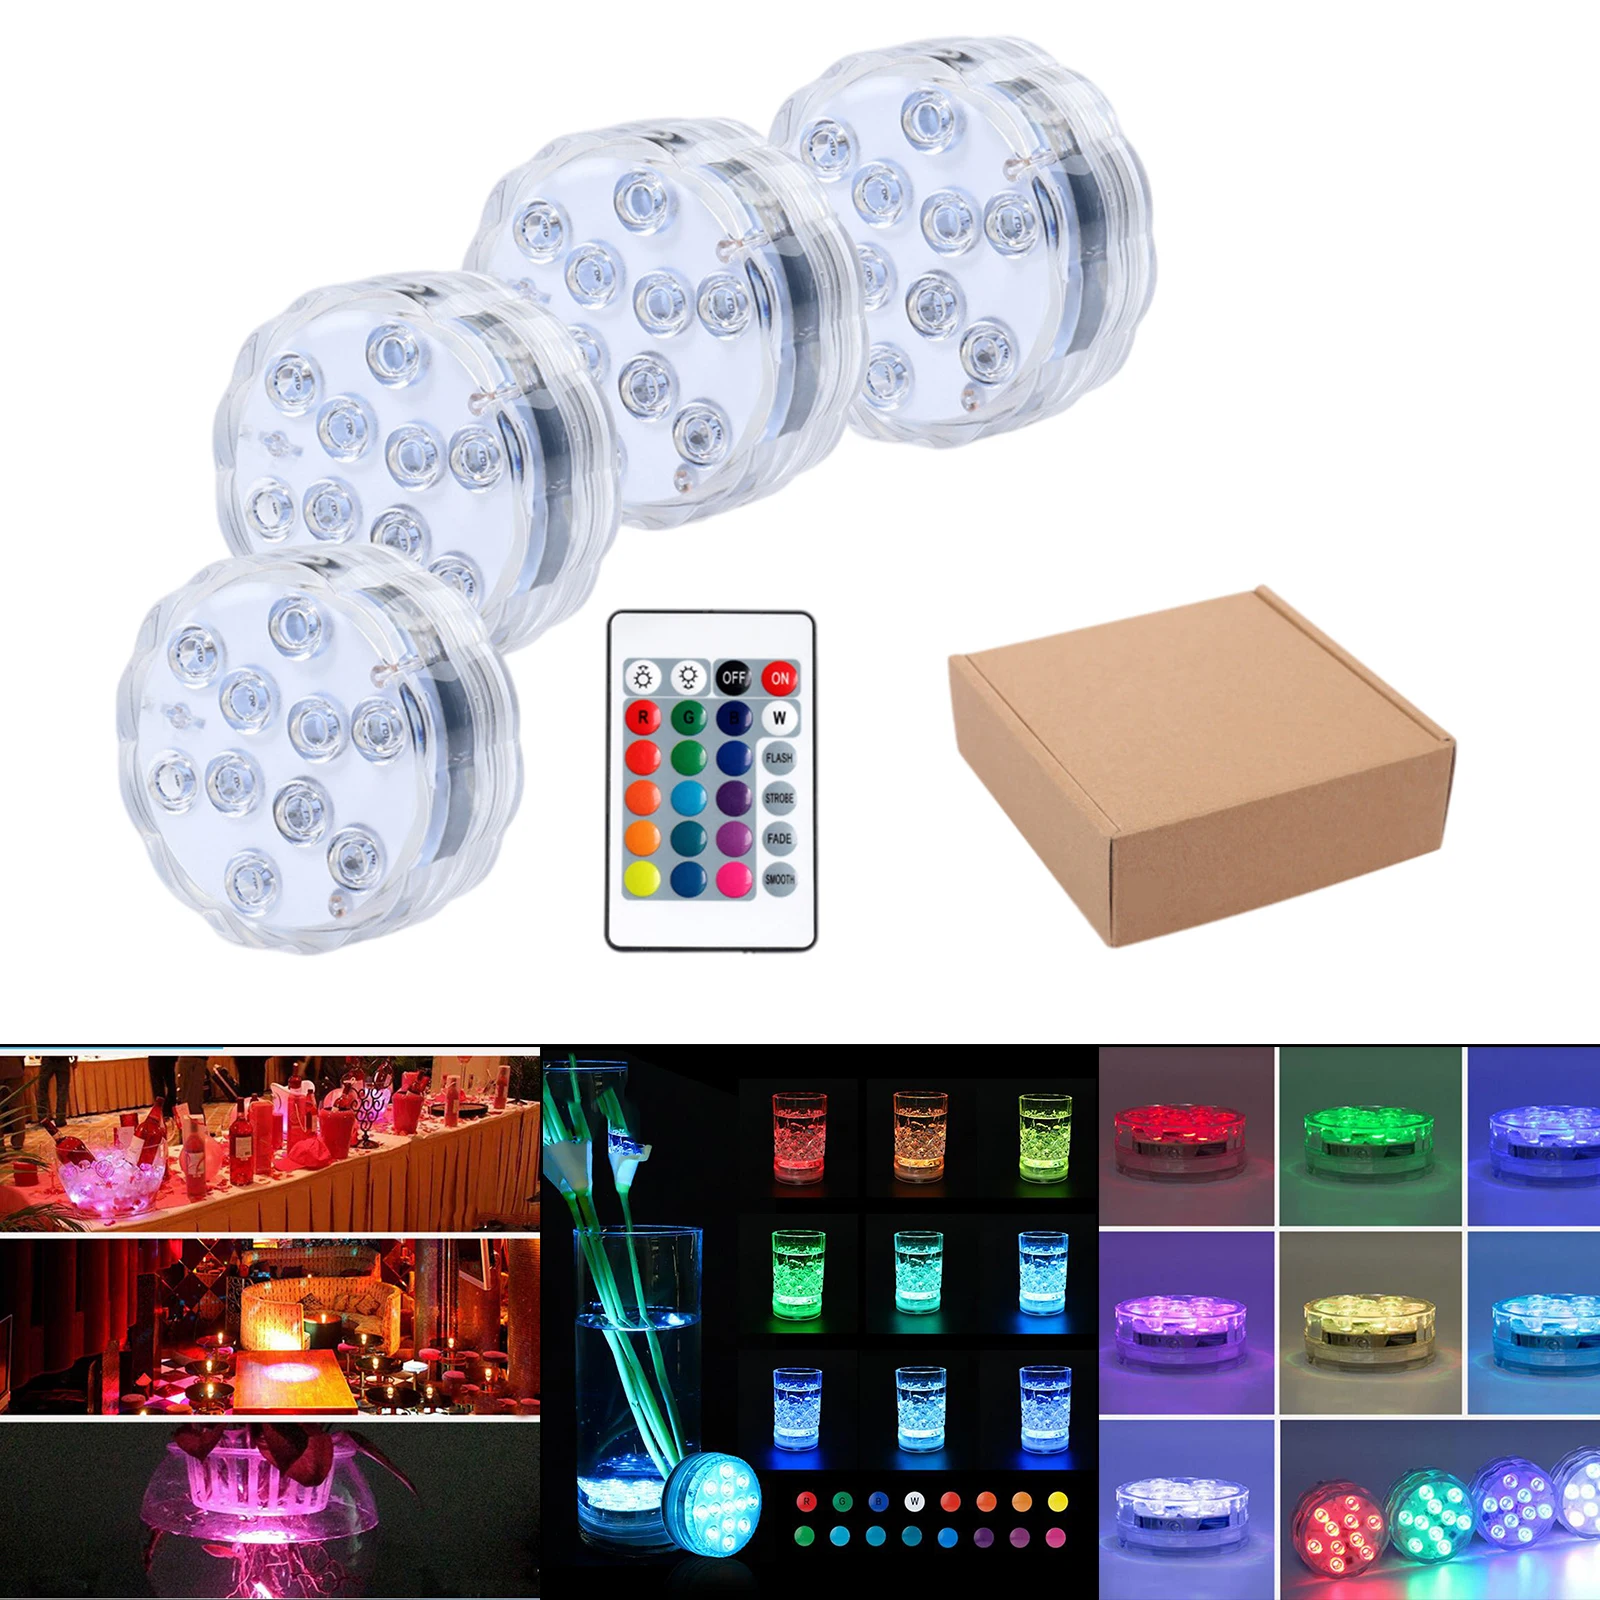 16-Color RGB Submersible LED Lights Waterproof Swimming Pools 7color Lights Underwater Lights with Suction Cup